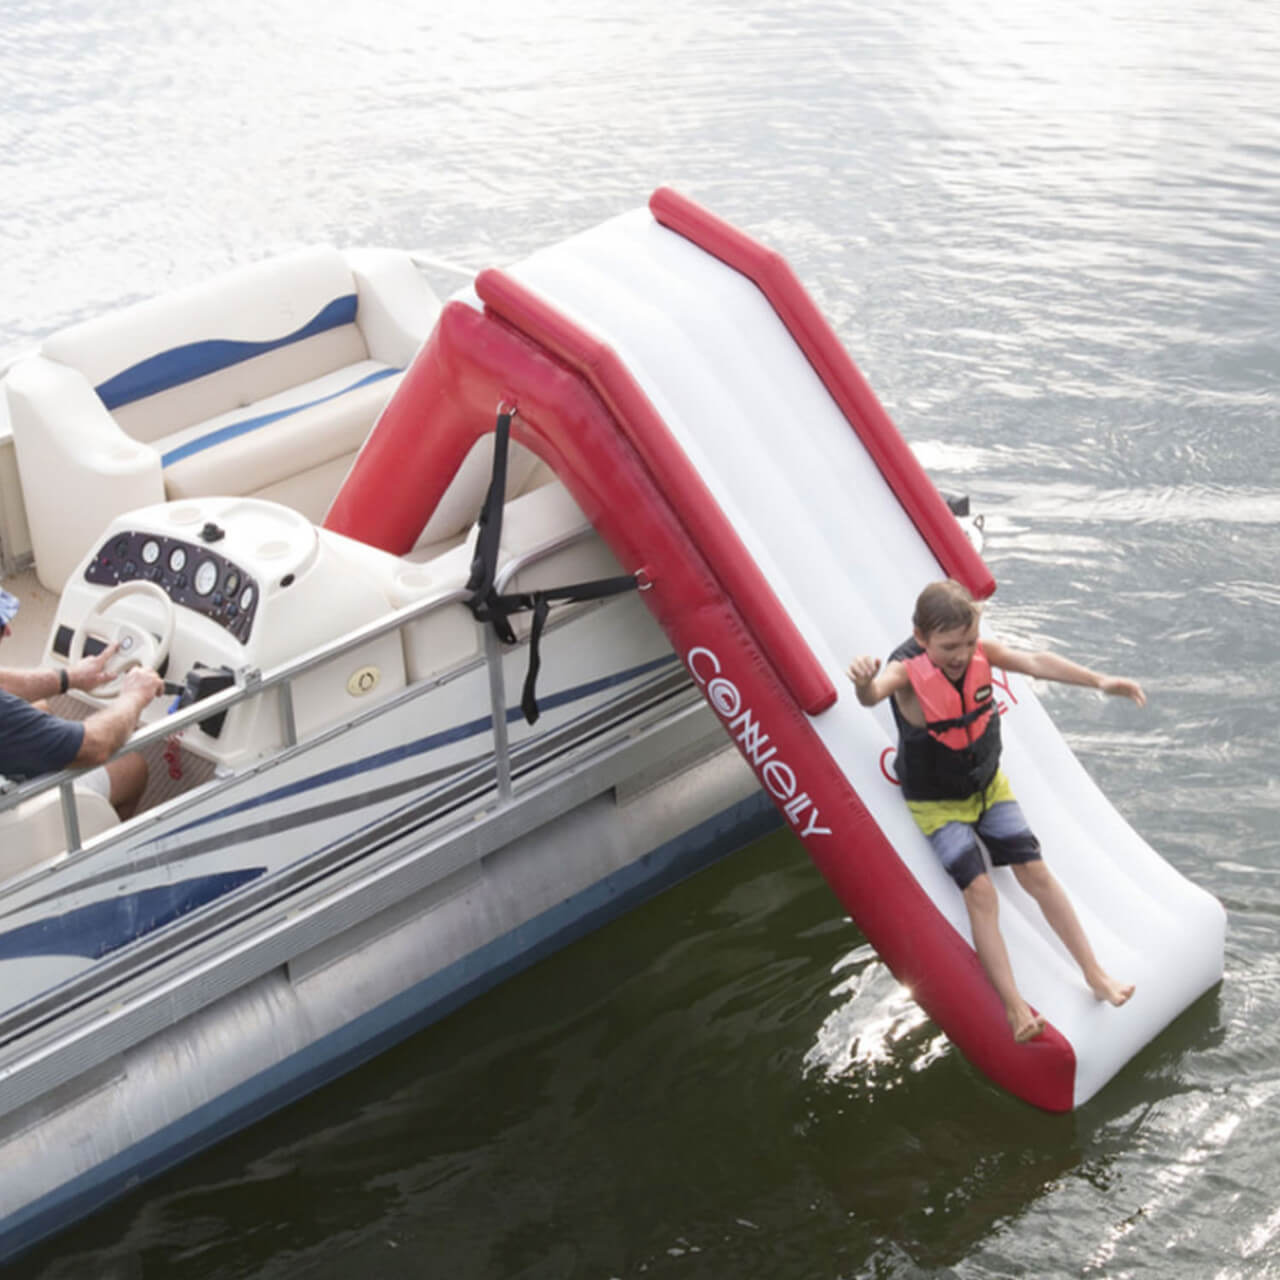 The Connelly pontoon boat is equipped with the Connelly inflatable water slide, effortlessly inflated using a Connelly 12V air pump. Constructed from commercial-grade reinforced Polymer, the Connelly water slide guarantees durability and strength.